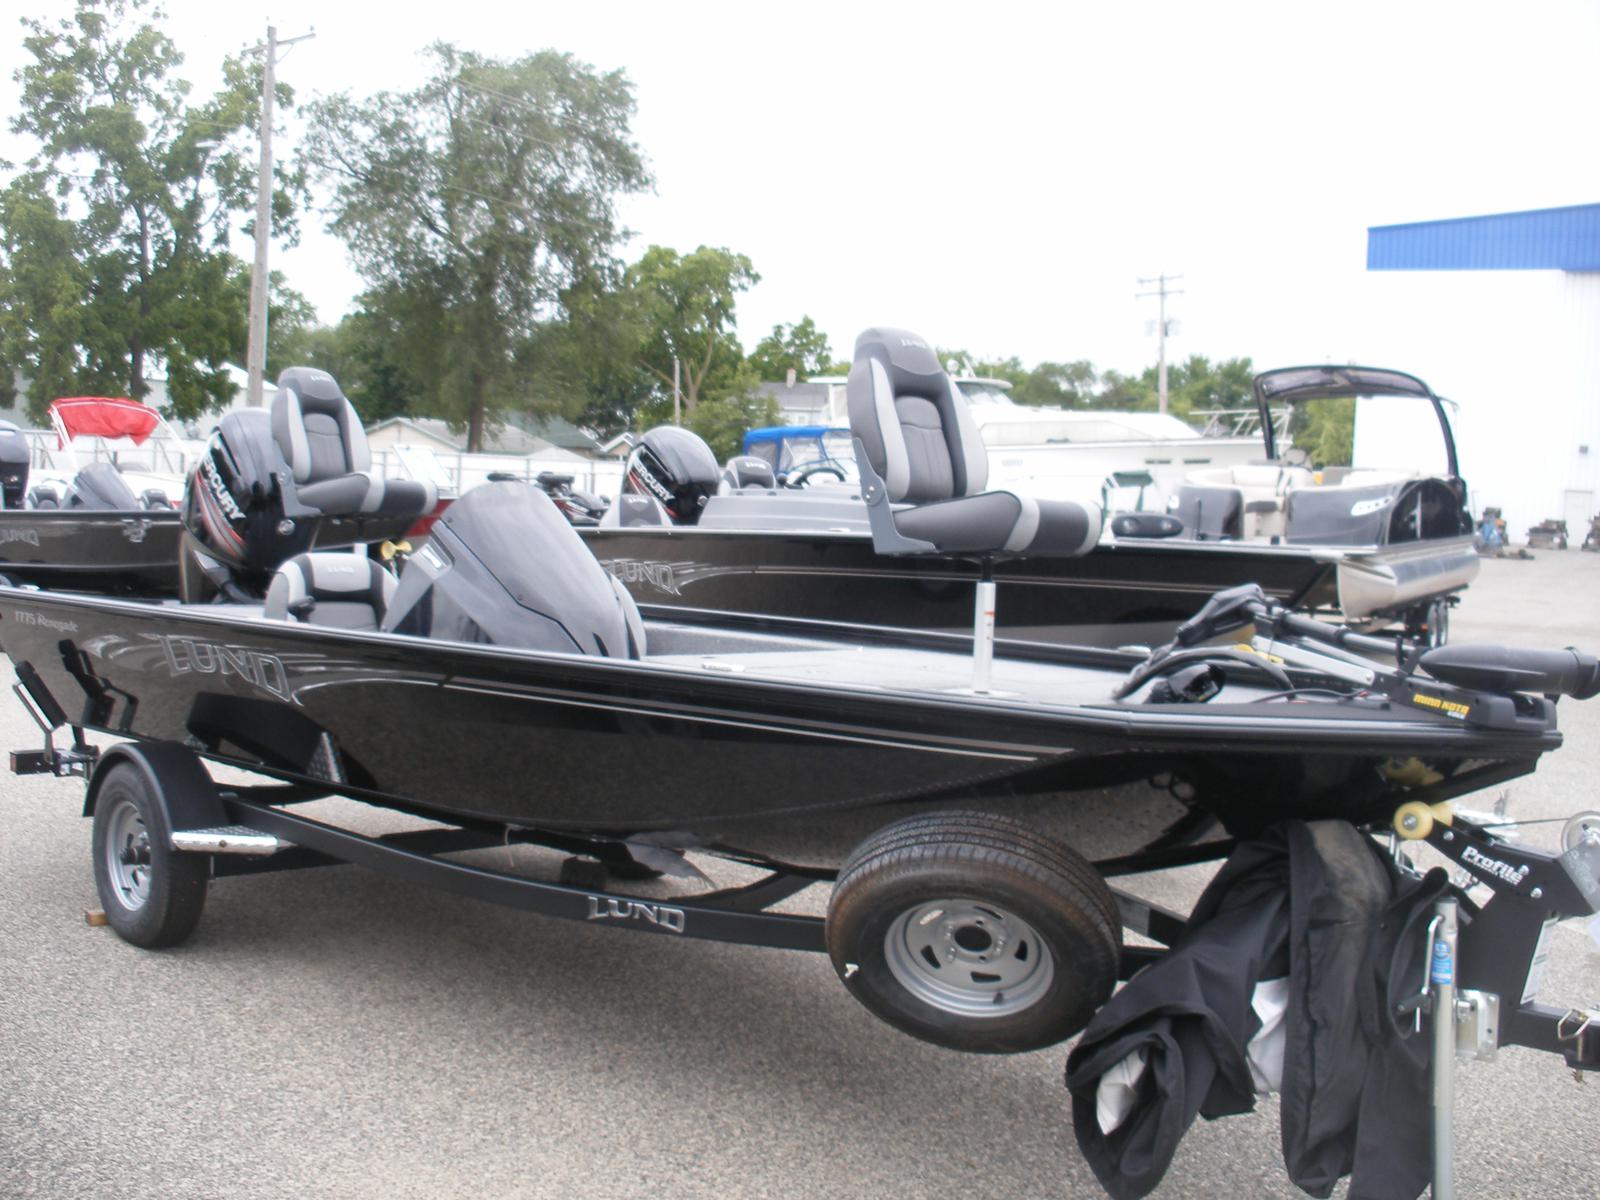 La crosse | New and Used Boats for Sale